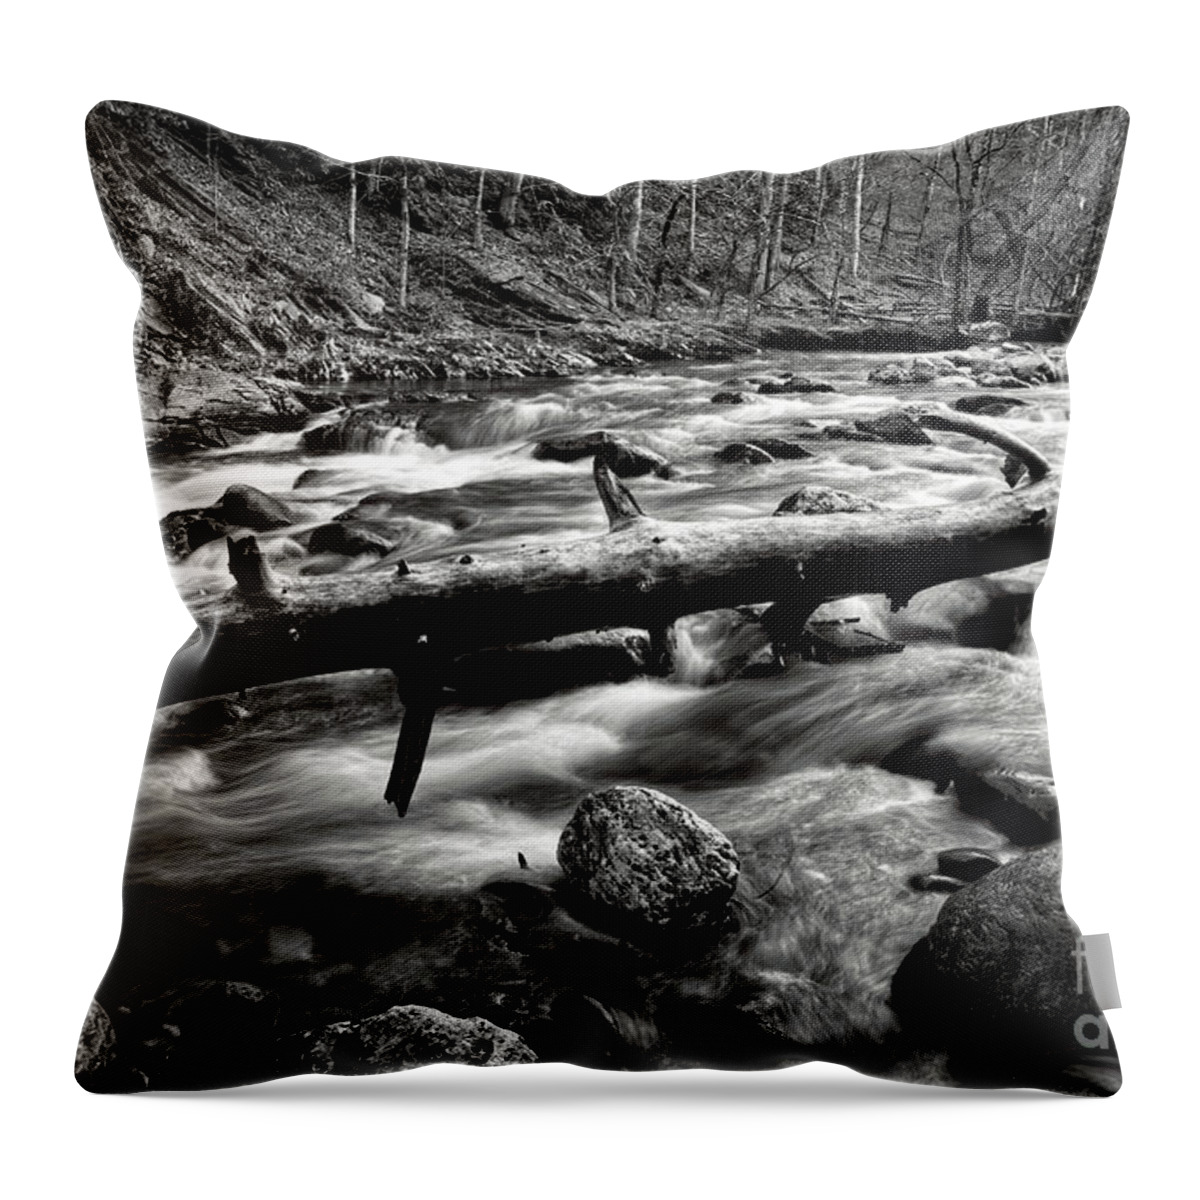 Middle Prong Trail Throw Pillow featuring the photograph Middle Prong Little River 5 by Phil Perkins